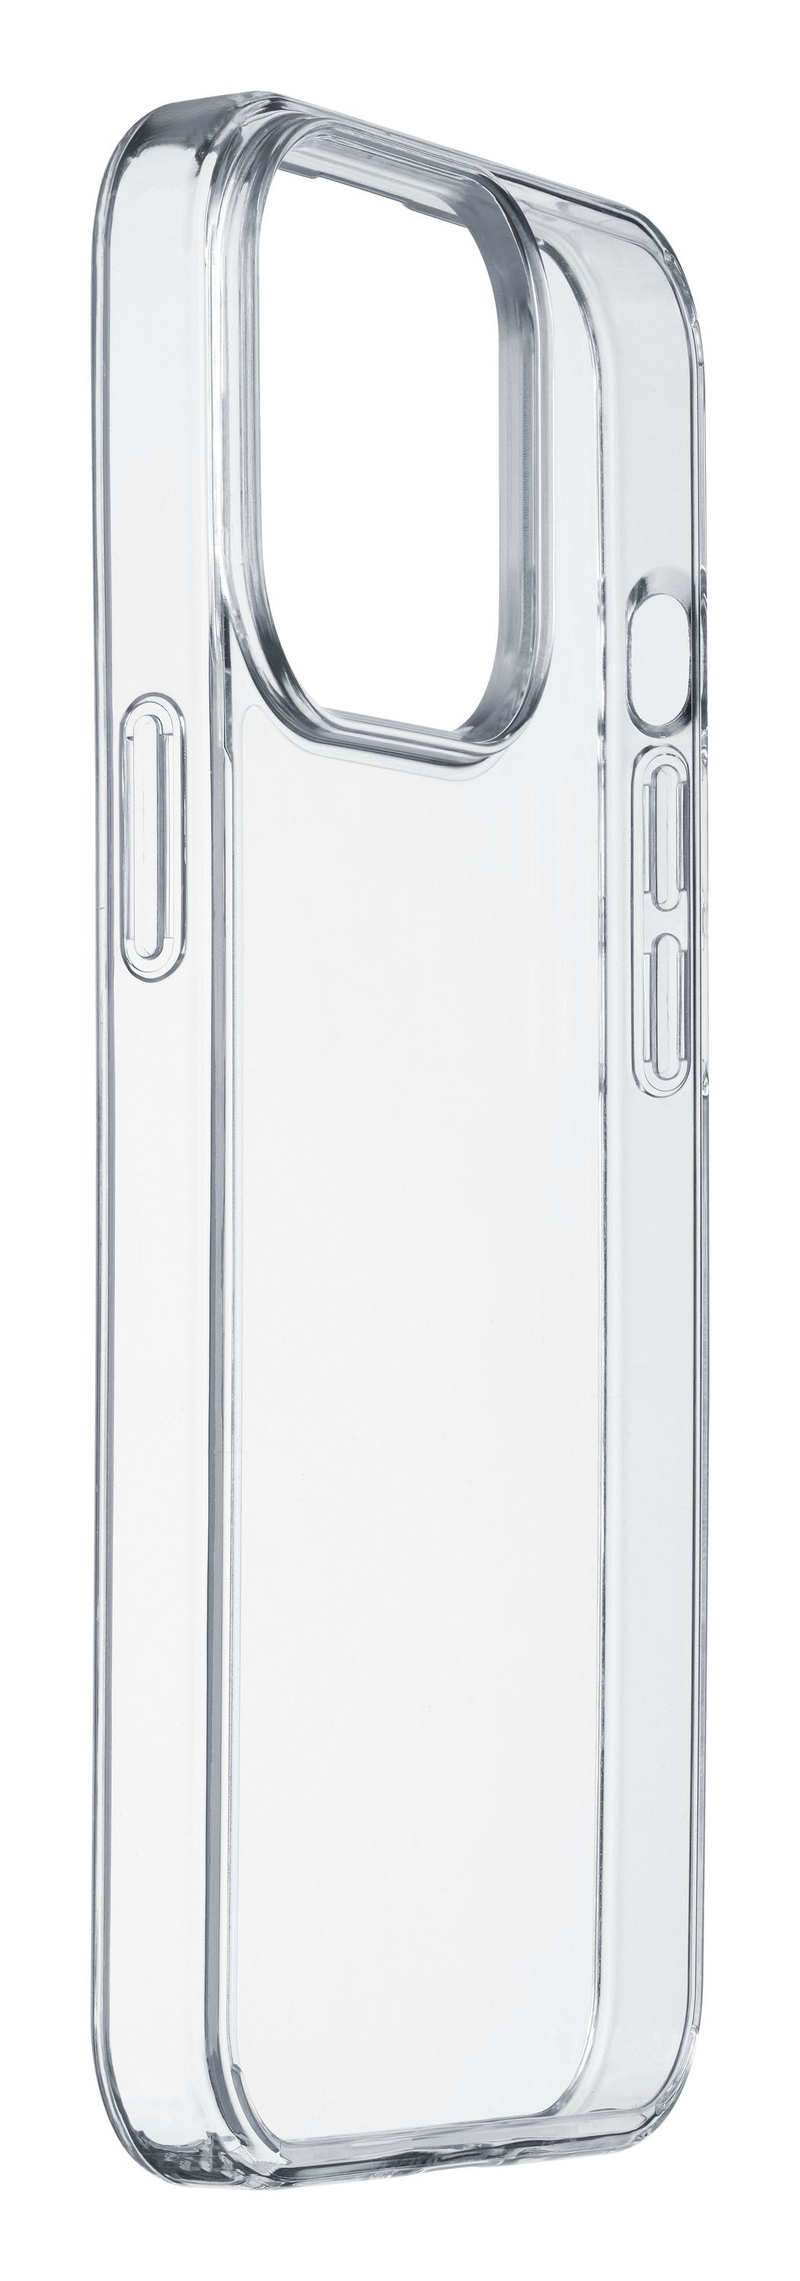 Cellularline Gloss Case For iPhone 13 Pro - Transparent